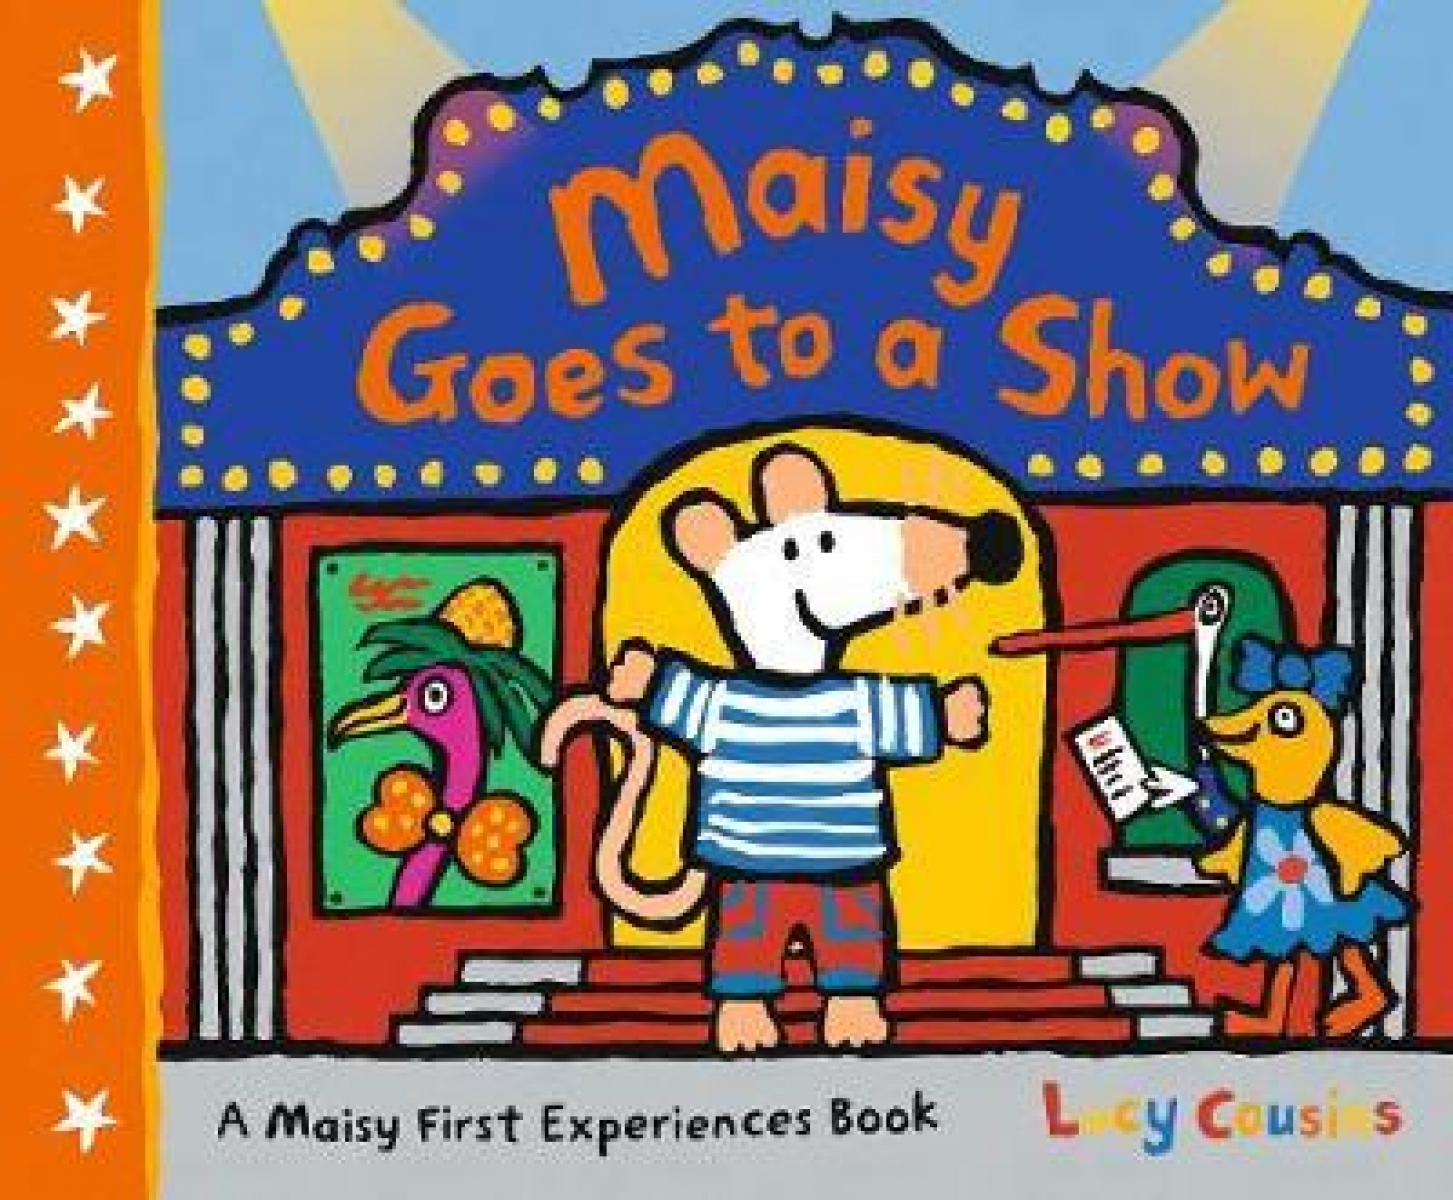 Lucy Cousins Maisy Goes to a Show 